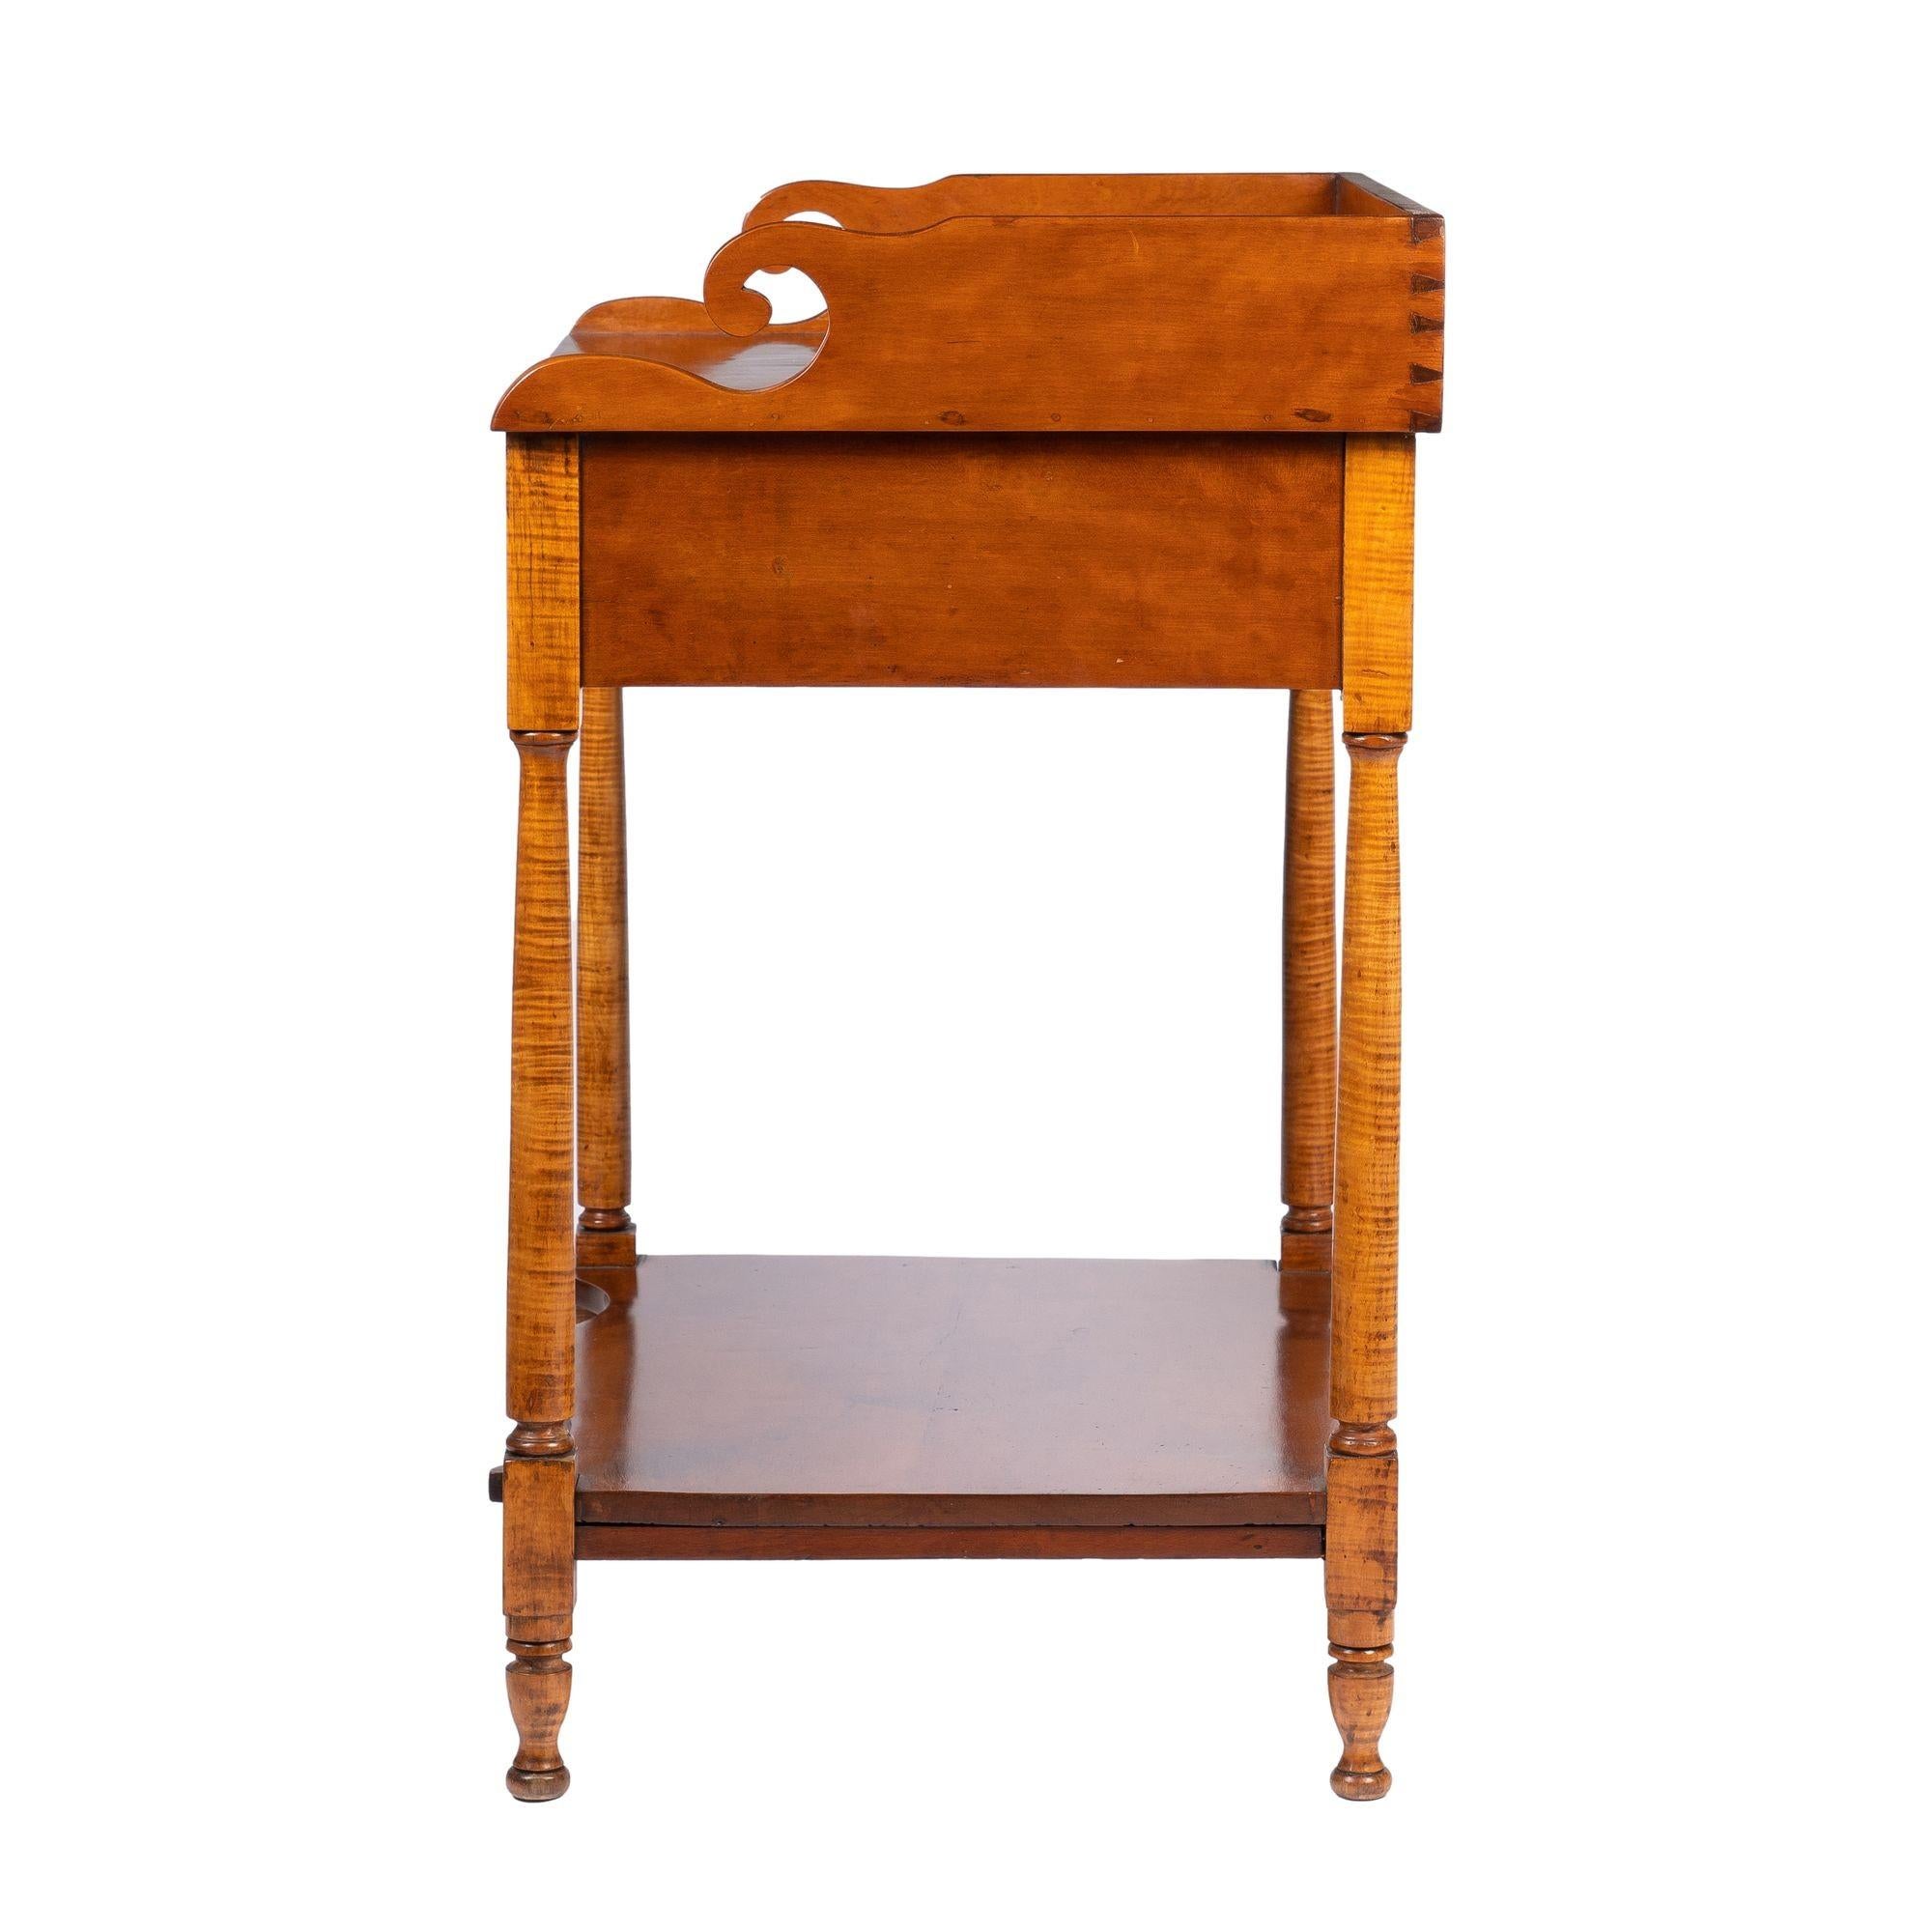 Rectangular cherry wood dressing stand with a scroll terminal splash. The splash rests on a bees wing figured cherry wood apron, which is supported by four curly maple dies and finely turned legs. The cherry wood shelf stretcher has a cupid's bow